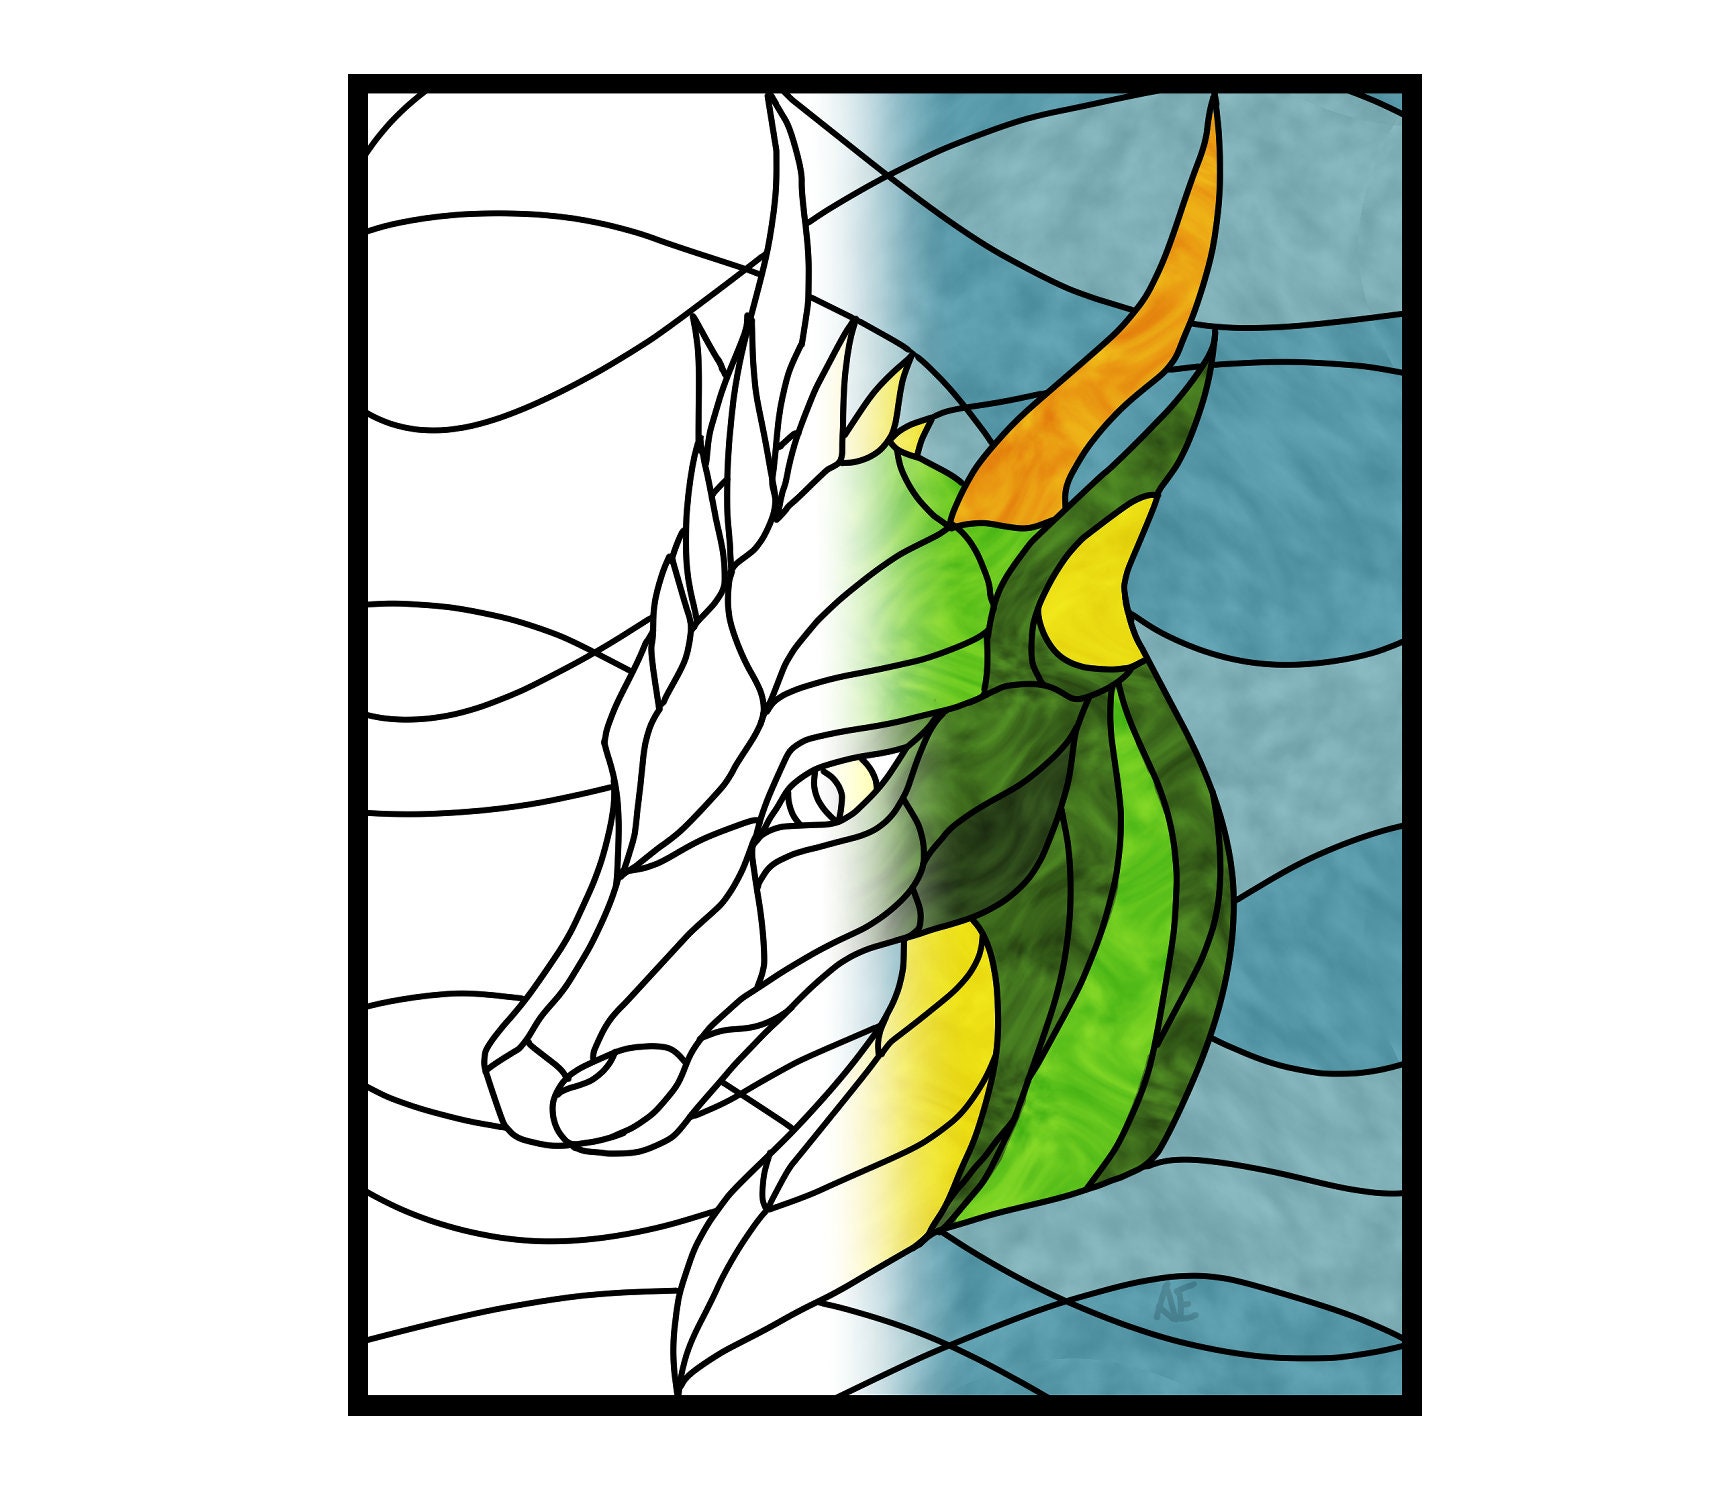 Dragon portrait stained glass pattern for adult and kids colouring book page or real stained glass panel prints x on x paper download now